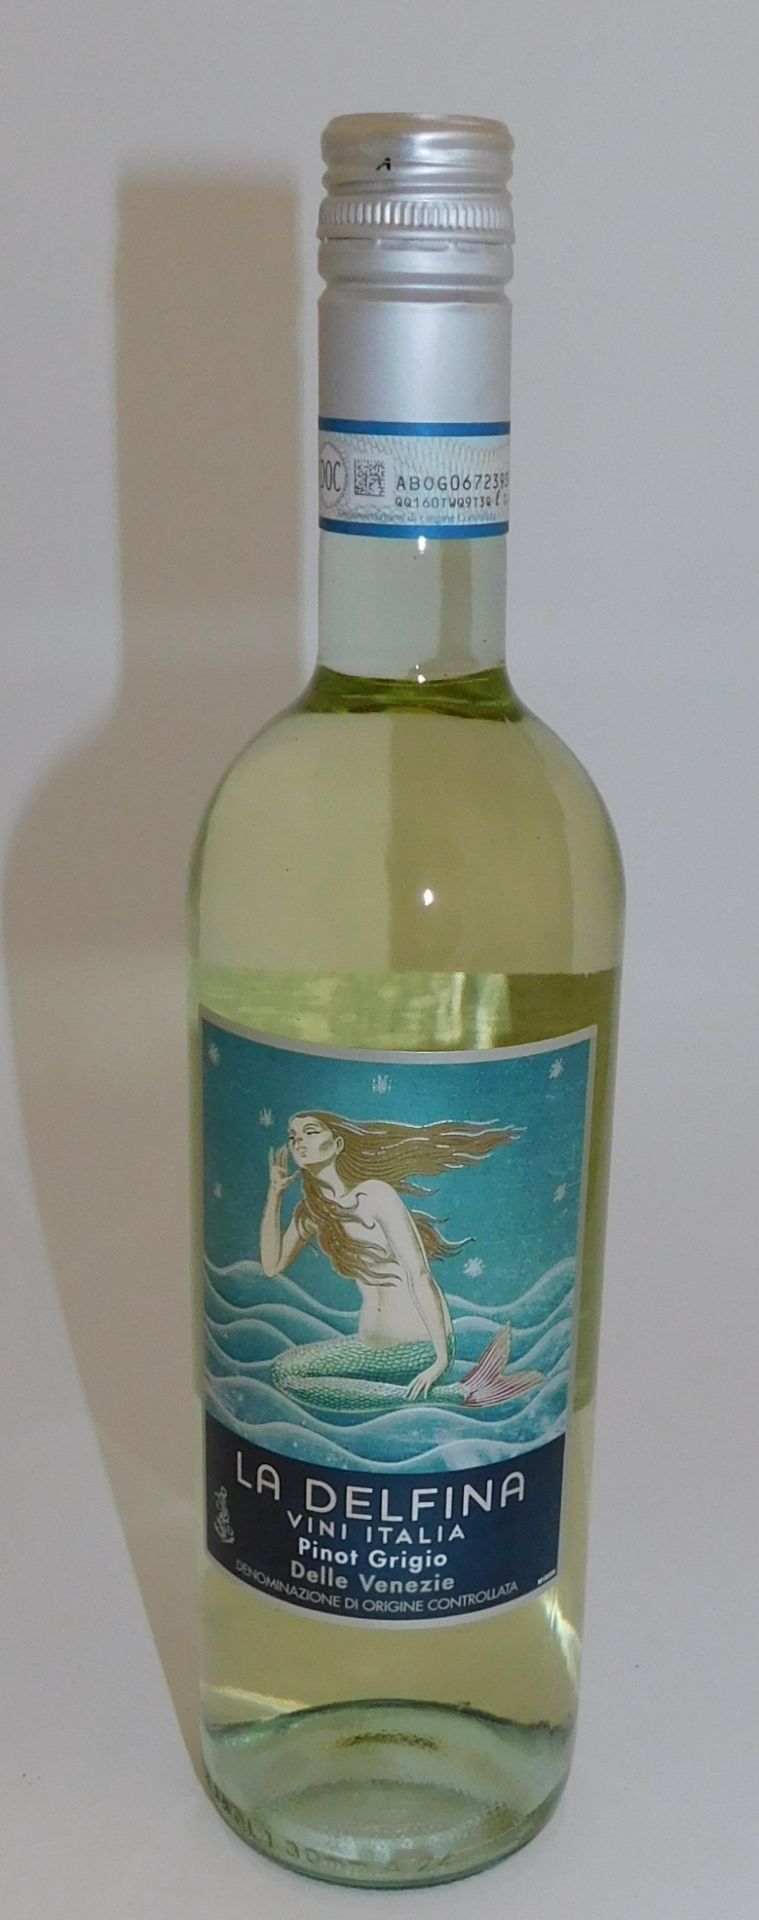 24 Bottles La Delfina Pinot Grigio, 75cl (Located Stockport – See General Notes for More Details)